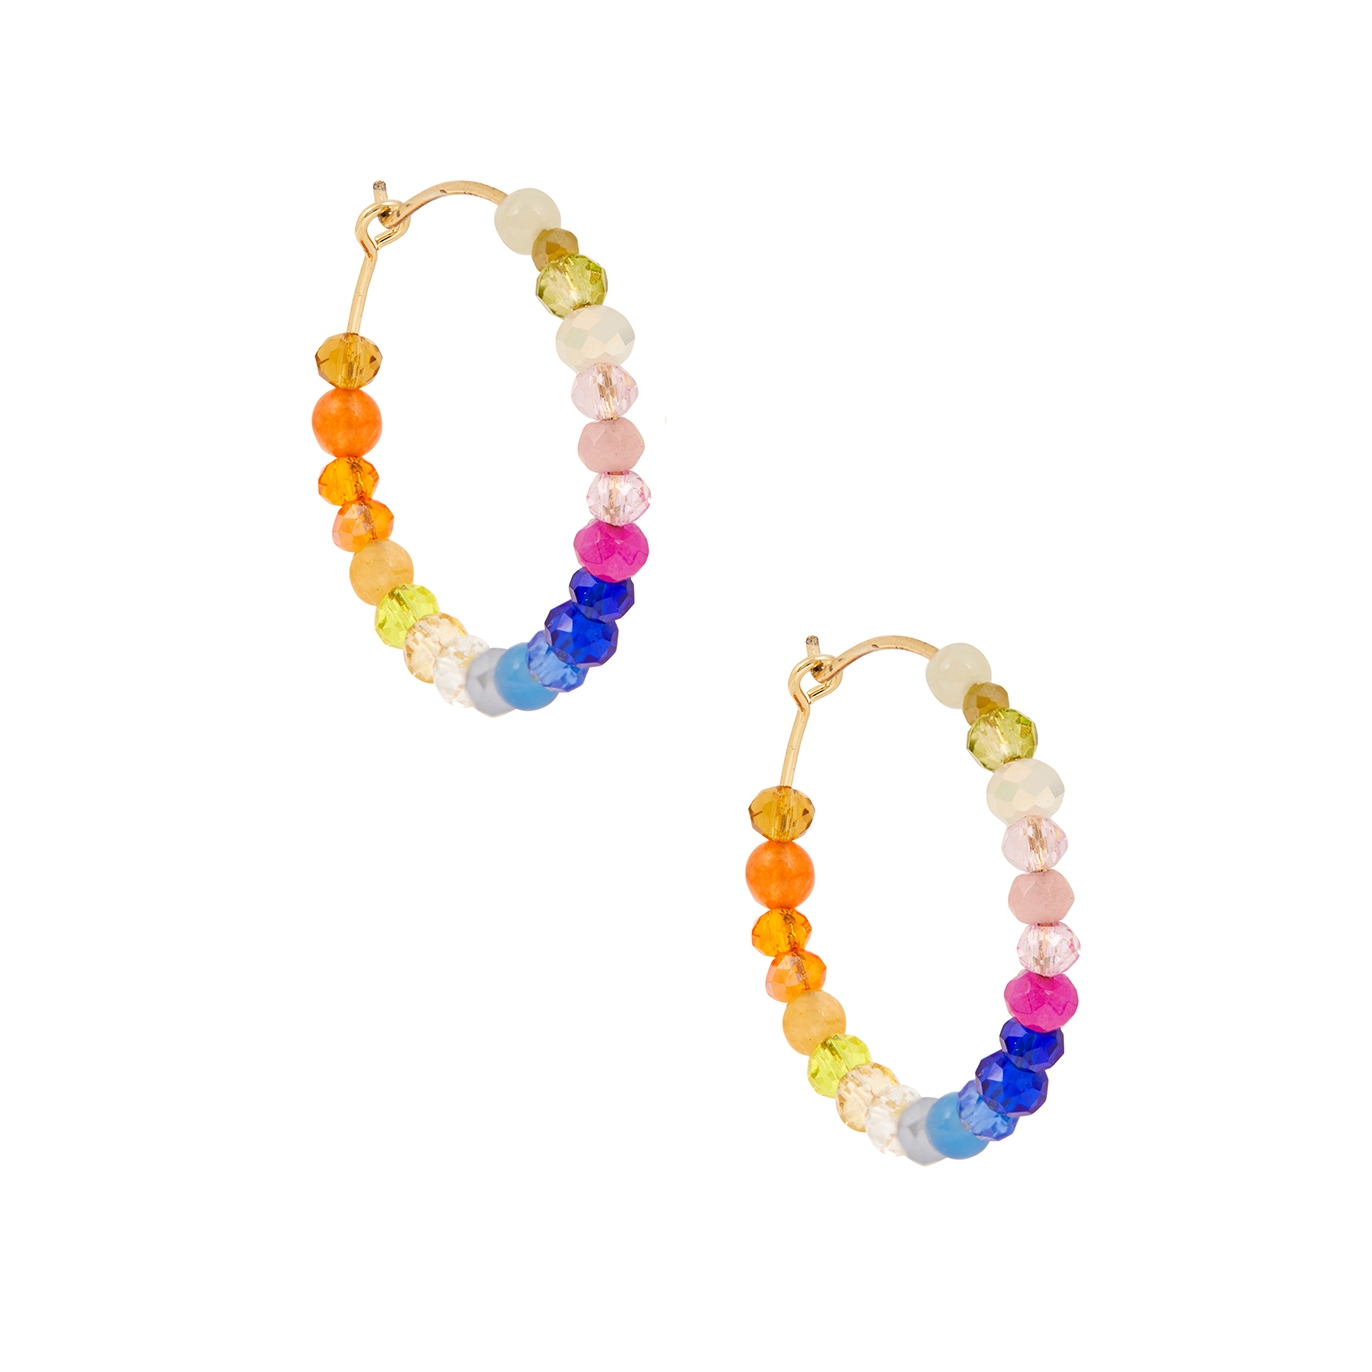 Anni LU Gili 18kt Gold-plated Hoop Earrings - Multicoloured - One Size